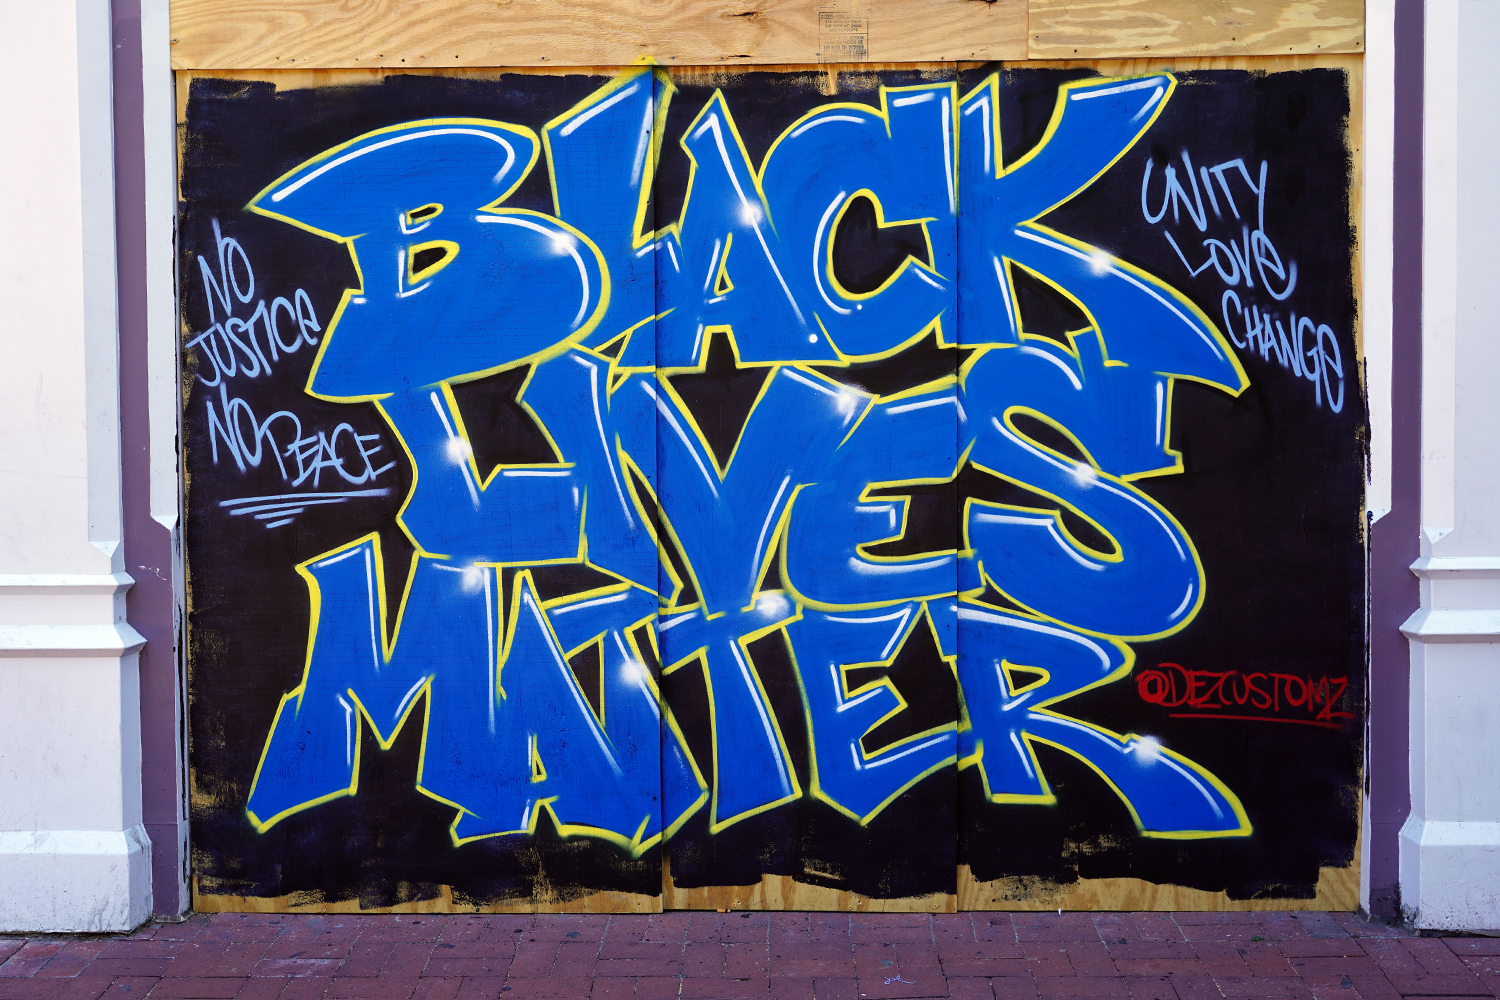 Gallery Place Murals 6: Black Lives Matter, by Dez Zambrano